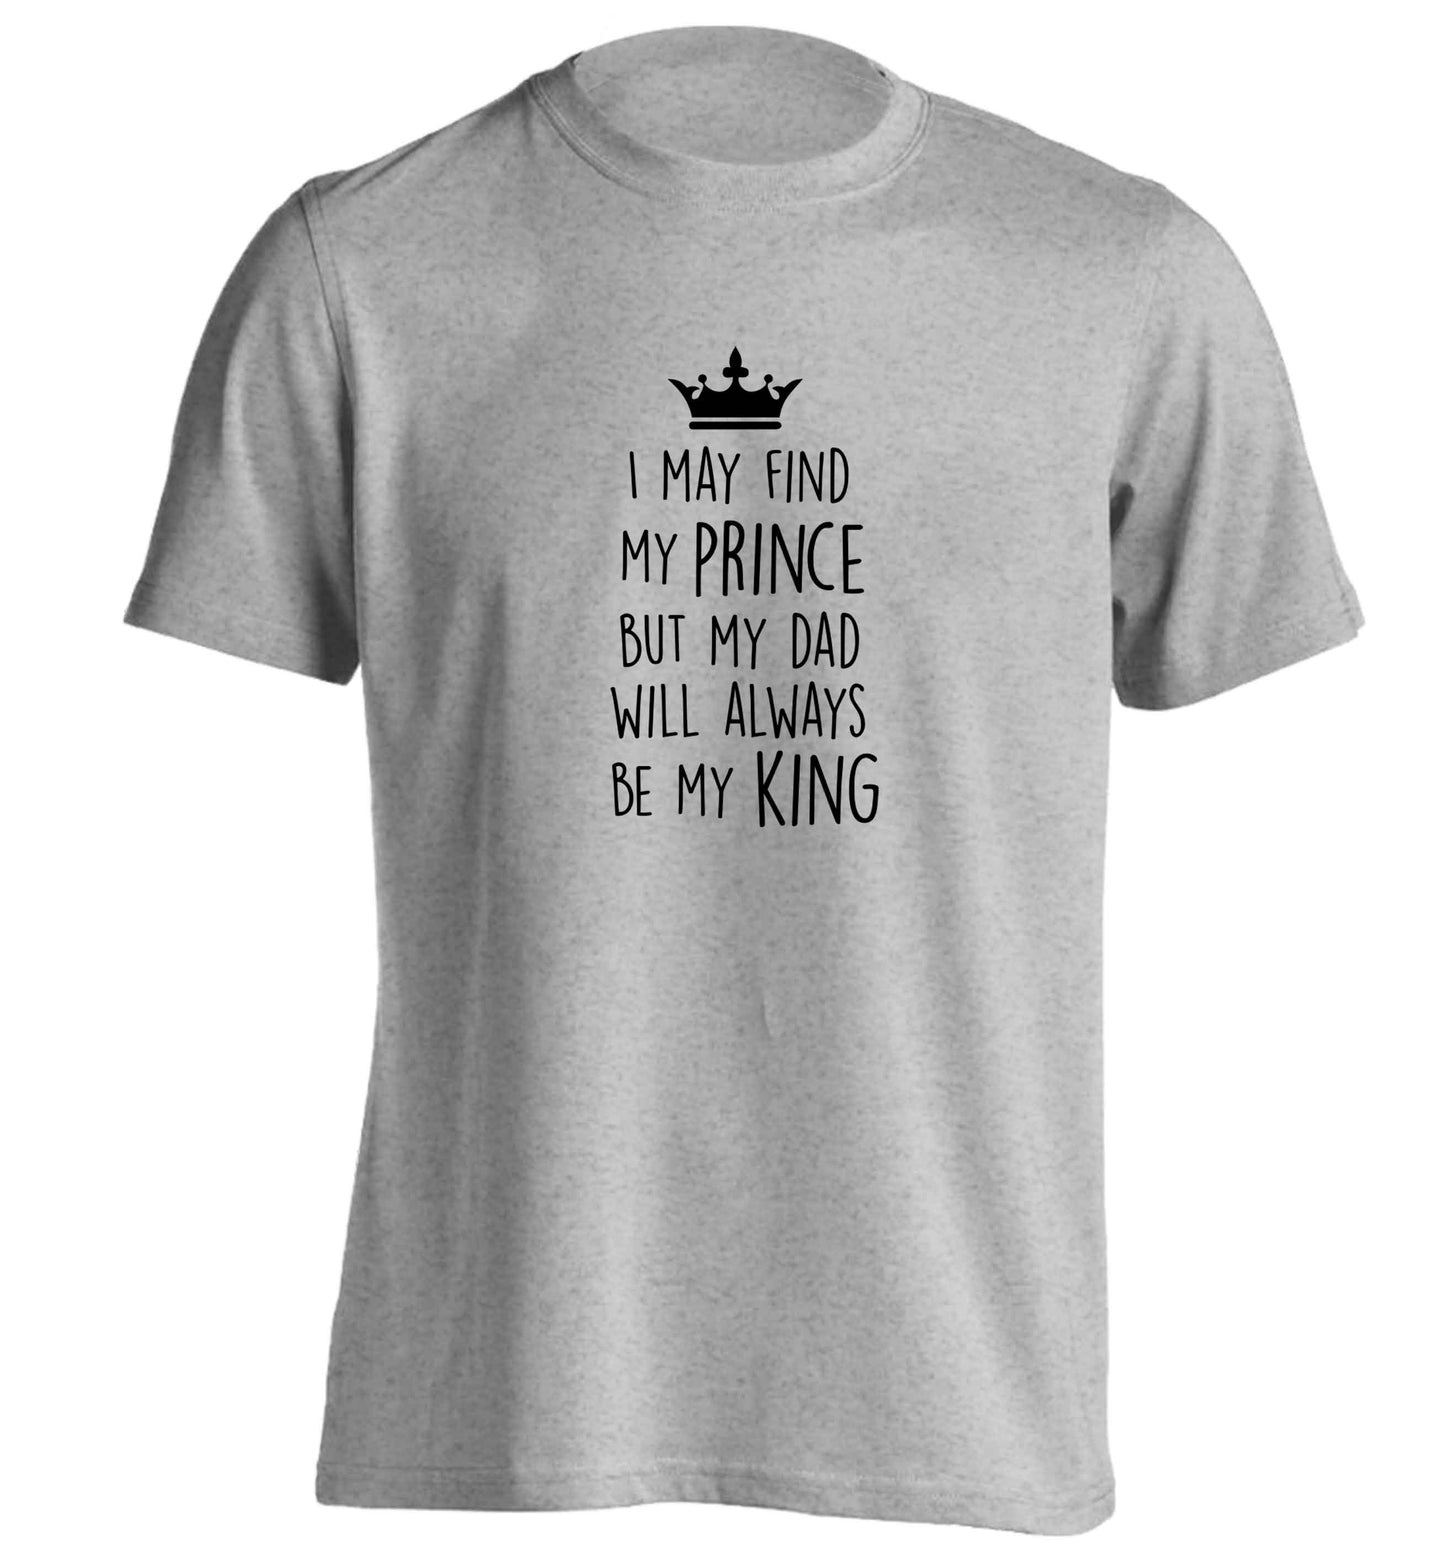 I may find my prince but my dad will always be my king adults unisex grey Tshirt 2XL